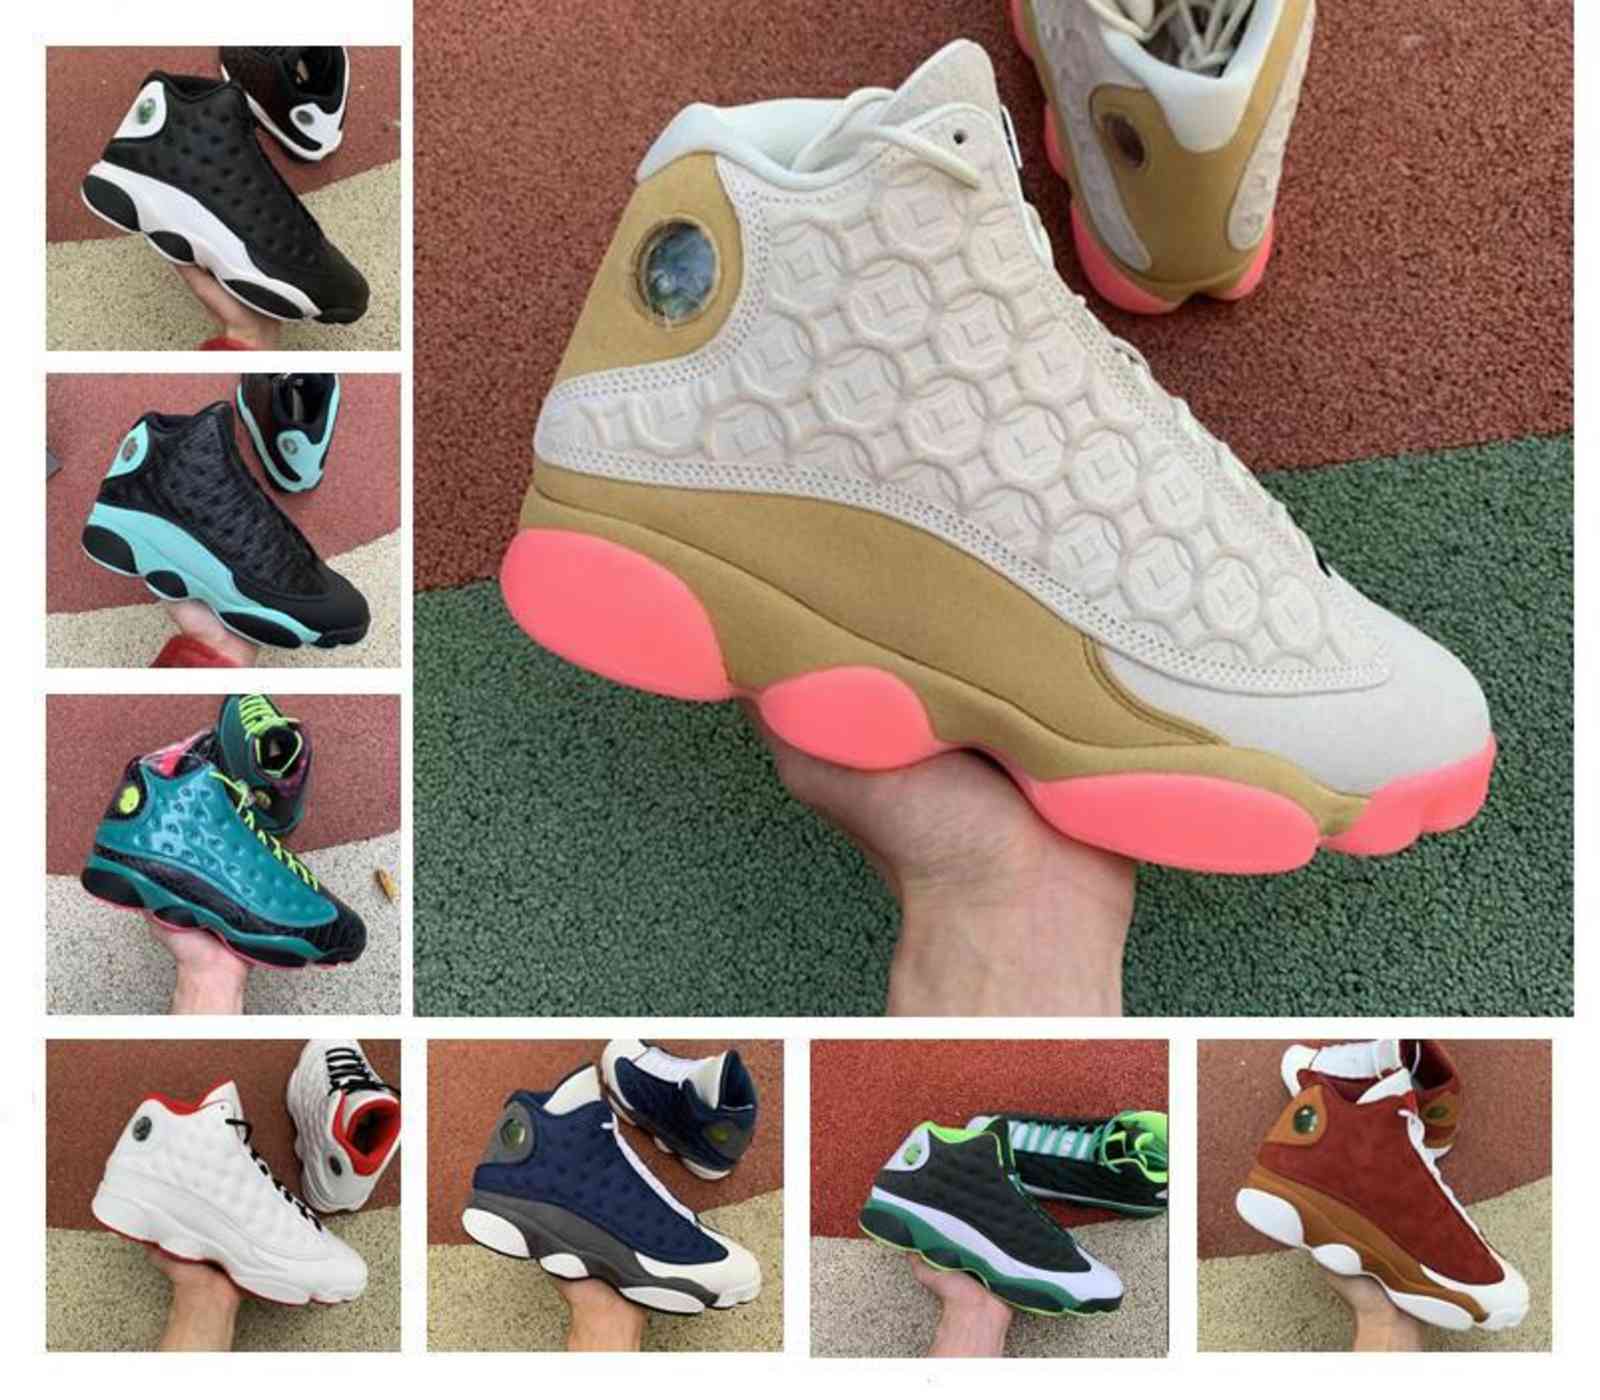 

Designer Jumpman 13 Basketball Shoes Island Green Clot Sepia Stone Sneakers 13s Playground Retroes Hyper Royal Trainers Flints Bred CNY, Beige